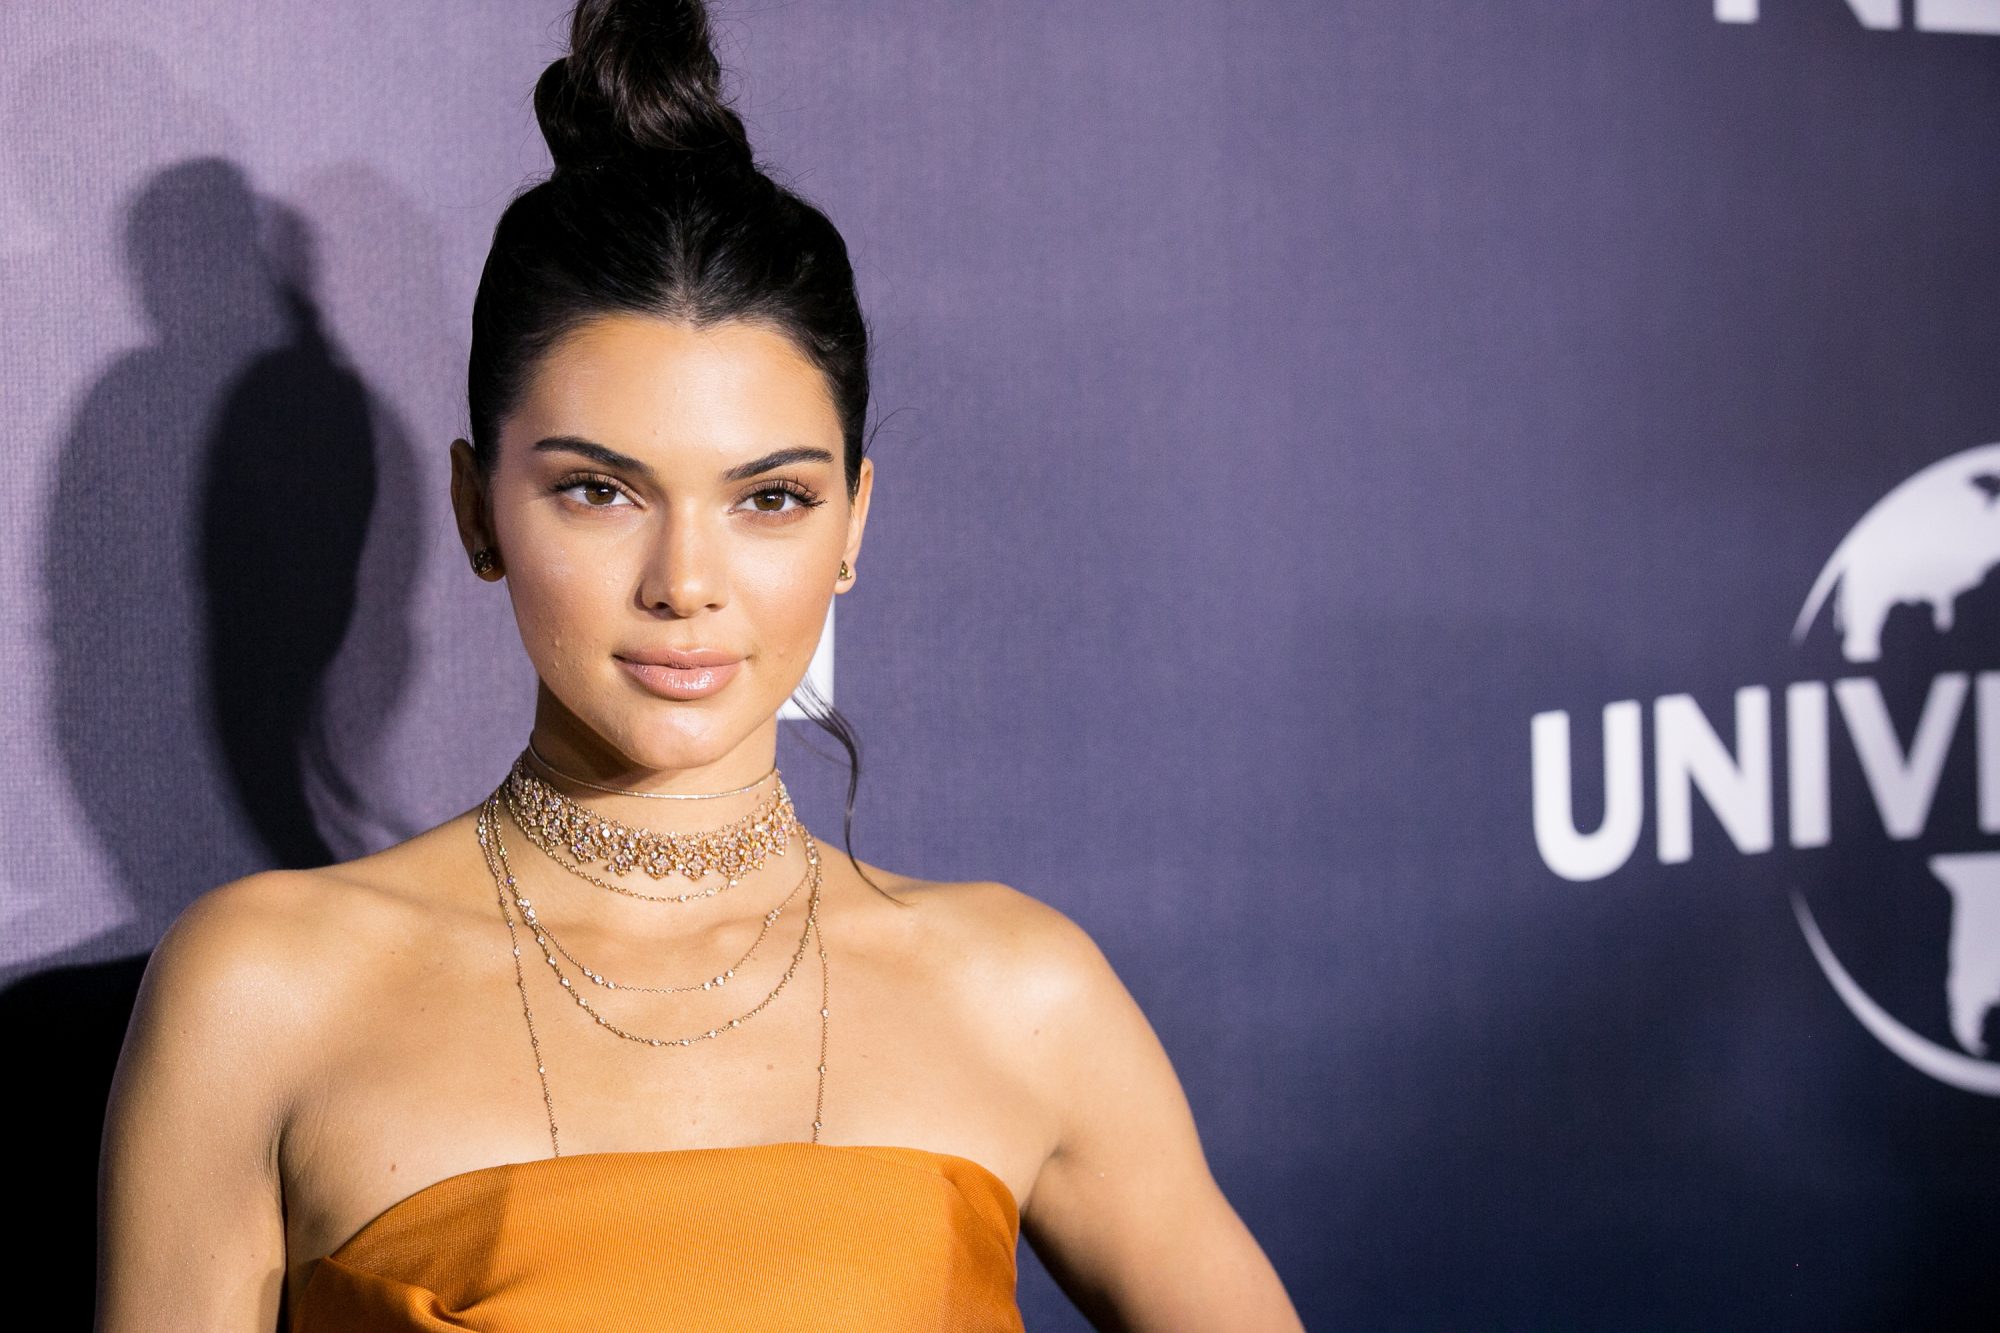 Kendall Jenner brings back the fanny pack